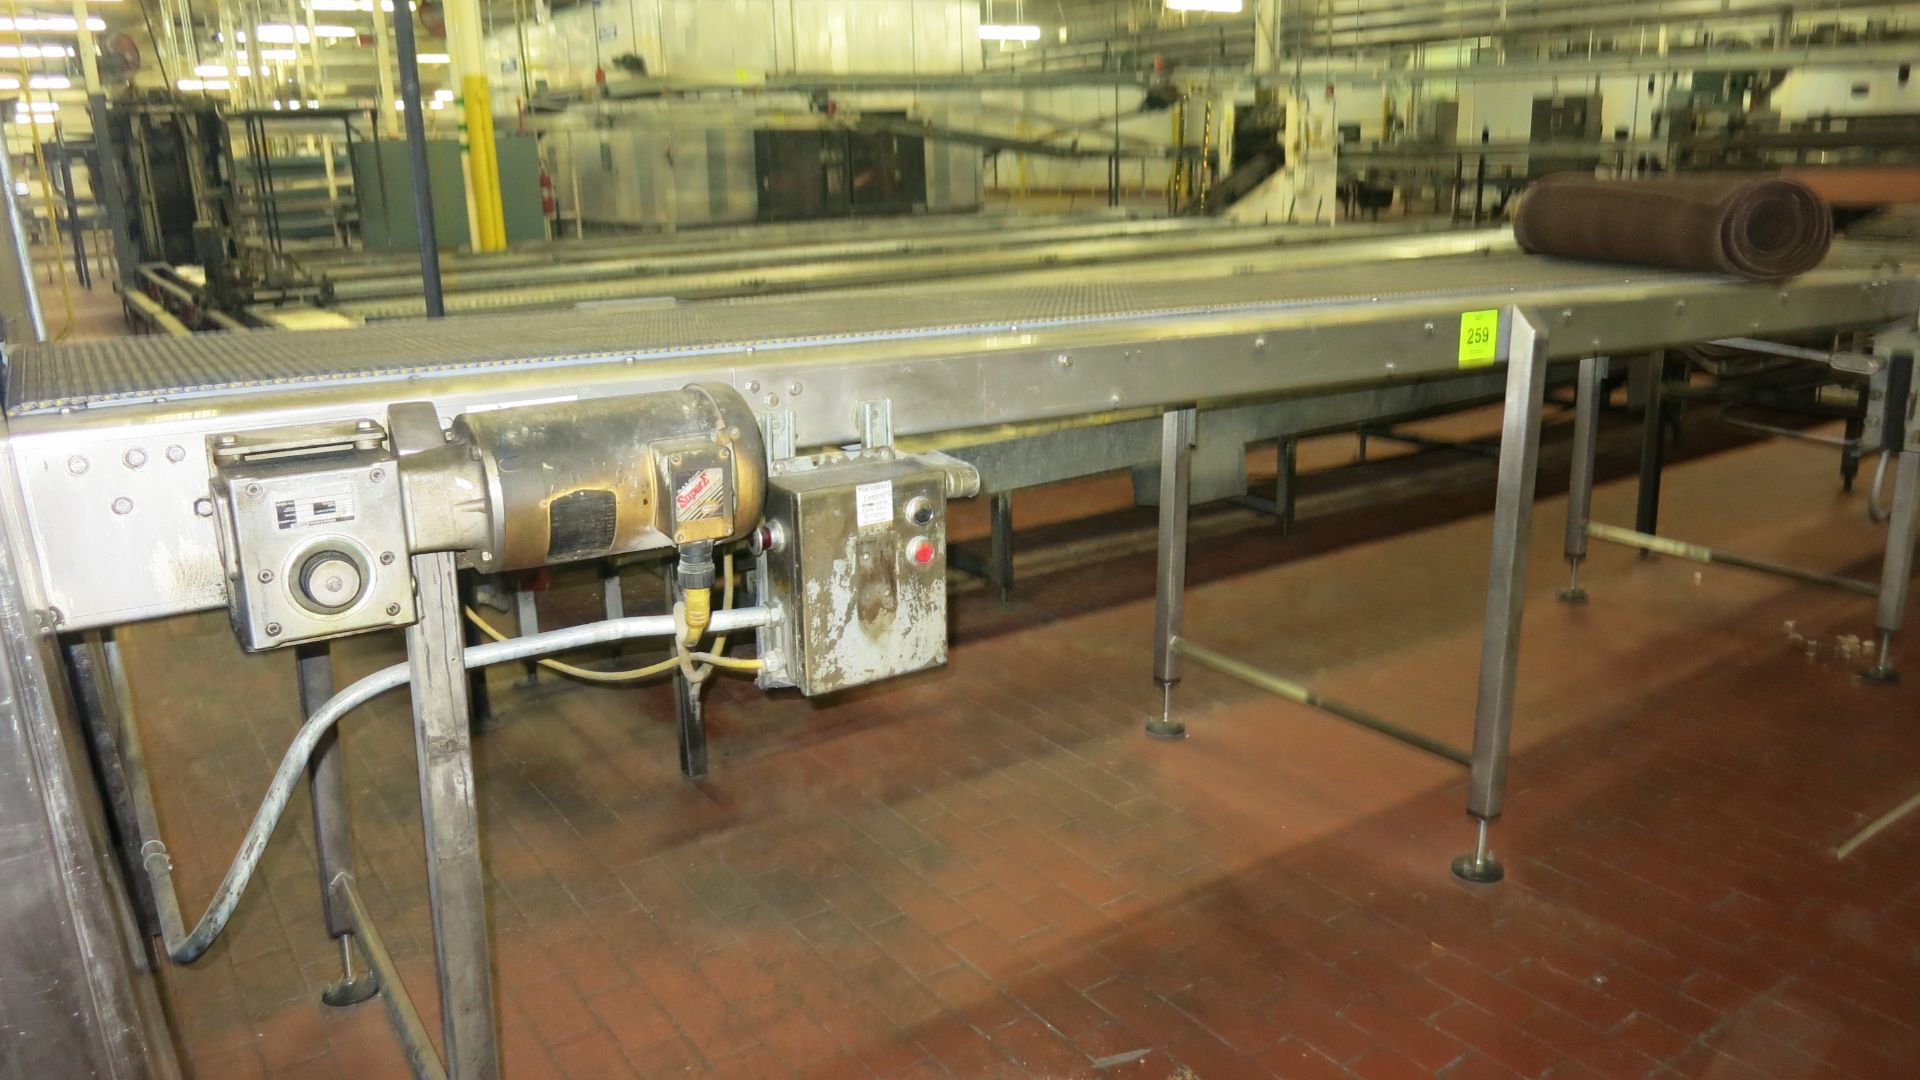 Oven infeed conveyor, 14' long straight section, 24" wide, 1 hp, #2014